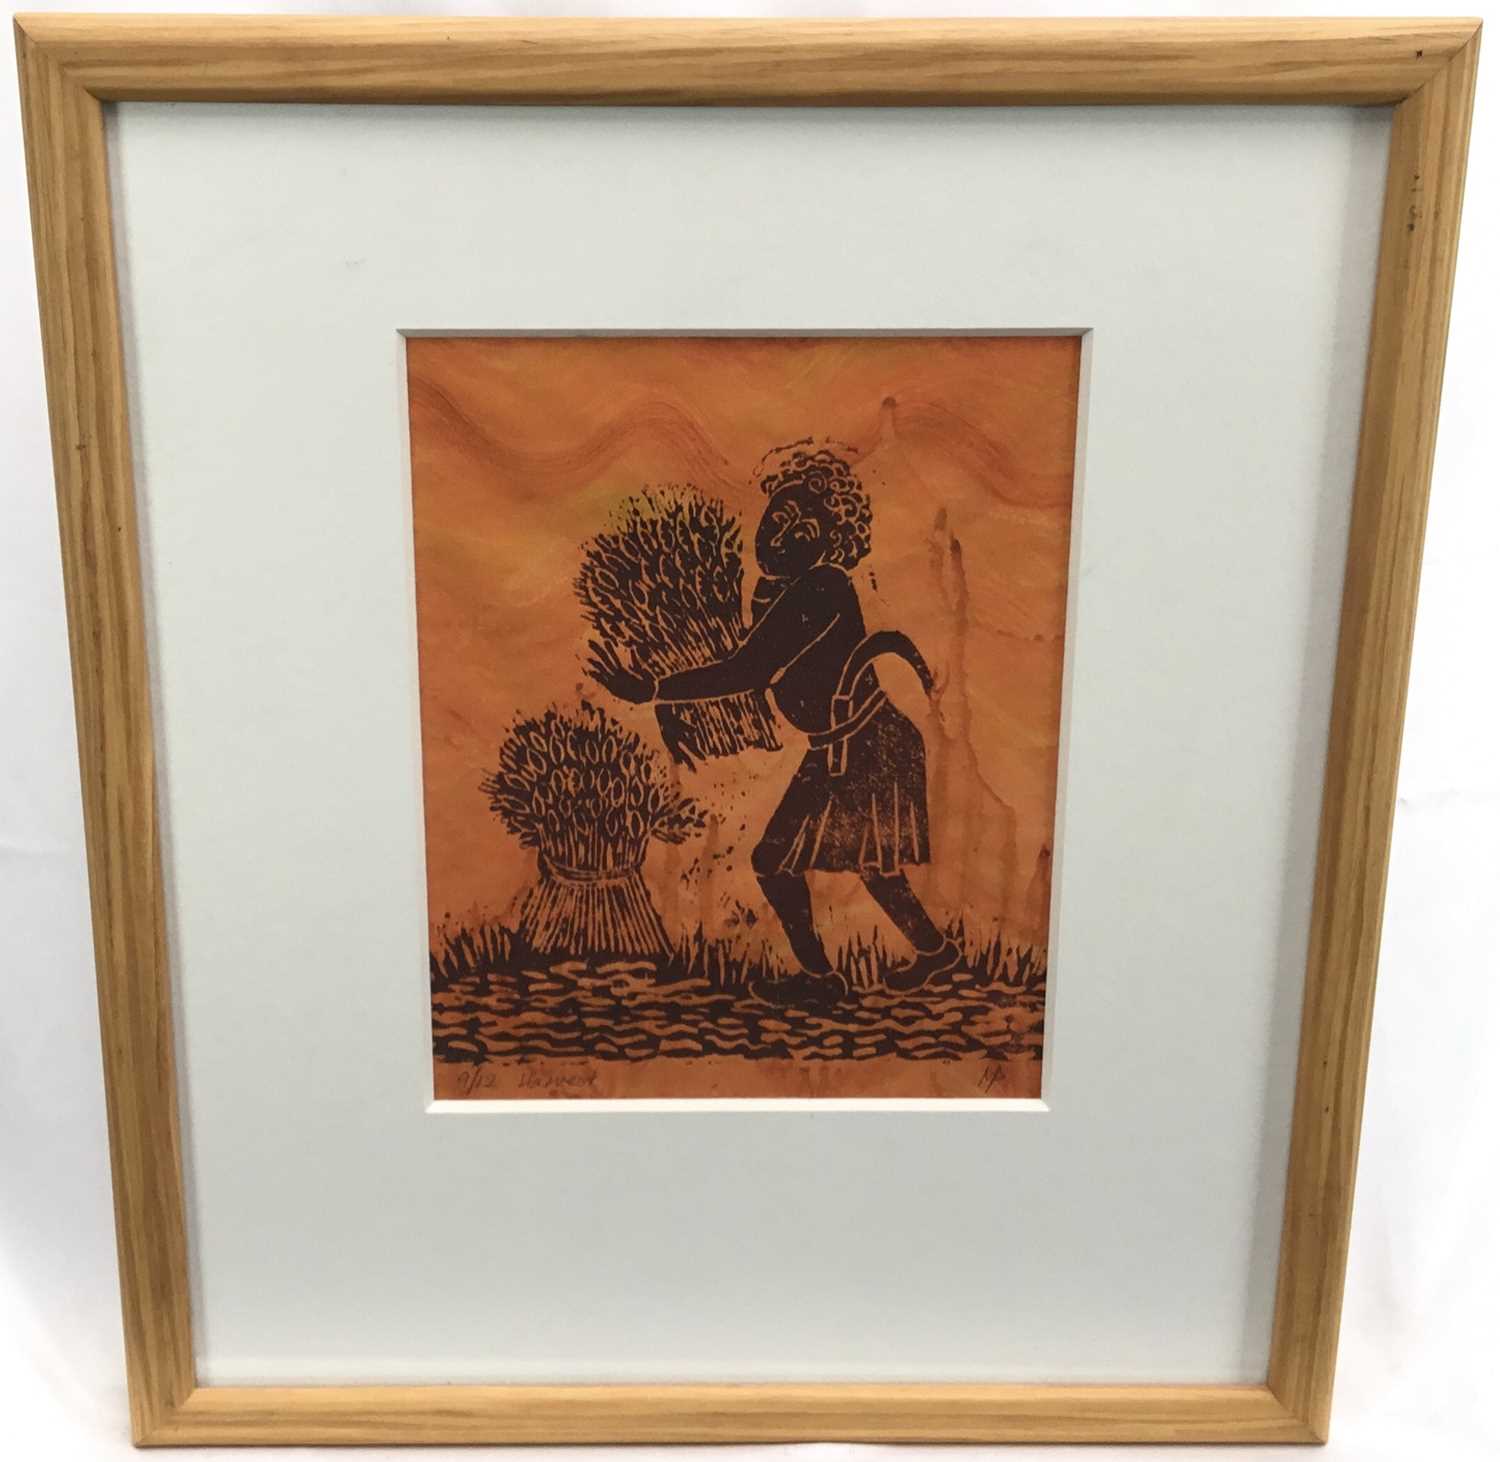 Lot 85 - Contemporary British school. Woodblock, “Harvest”. Signed “MP” and numbered “9/12”. Framed. 25x19.5cm